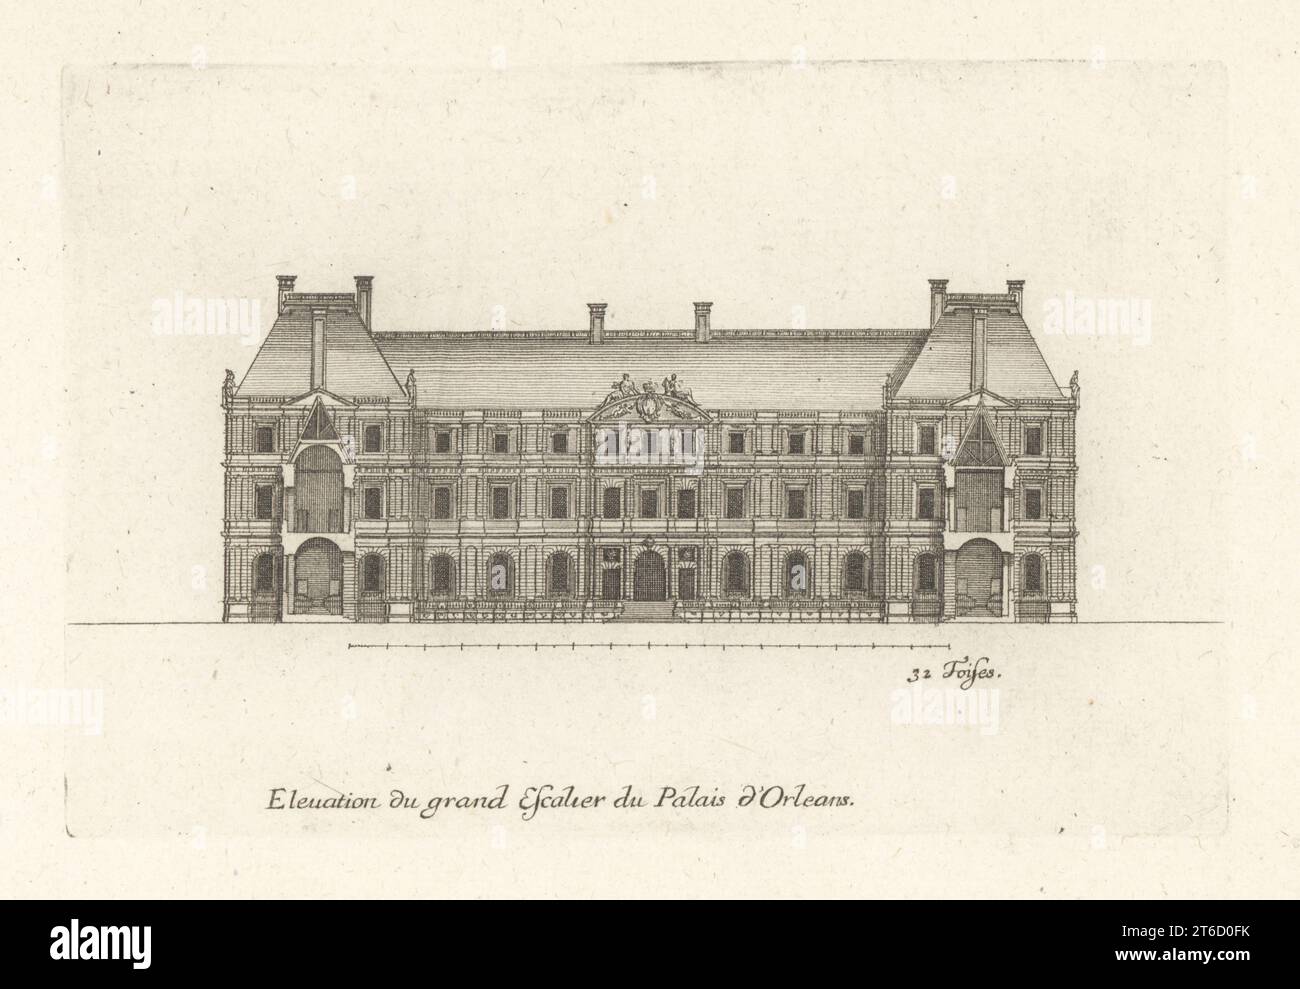 Elevation of the grand staircase to Luxembourg Palace (Palais du Luxembourg), built to the designs of French architect Salomon de Brosse for Marie de' Medici. Elevation du grand escalier du Palais d'Orleans. Copperplate engraving drawn and engraved by Jean Marot from his Recueil des Plans, Profils et Elevations de Plusieurs Palais, Chasteaux, Eglises, Sepultures, Grotes et Hotels,Collection of Plans, Profiles and Elevations of Palaces, Castles, Churches, Tombs, Grottos and Hotels, chez Mariette, Paris, 1655. Stock Photo